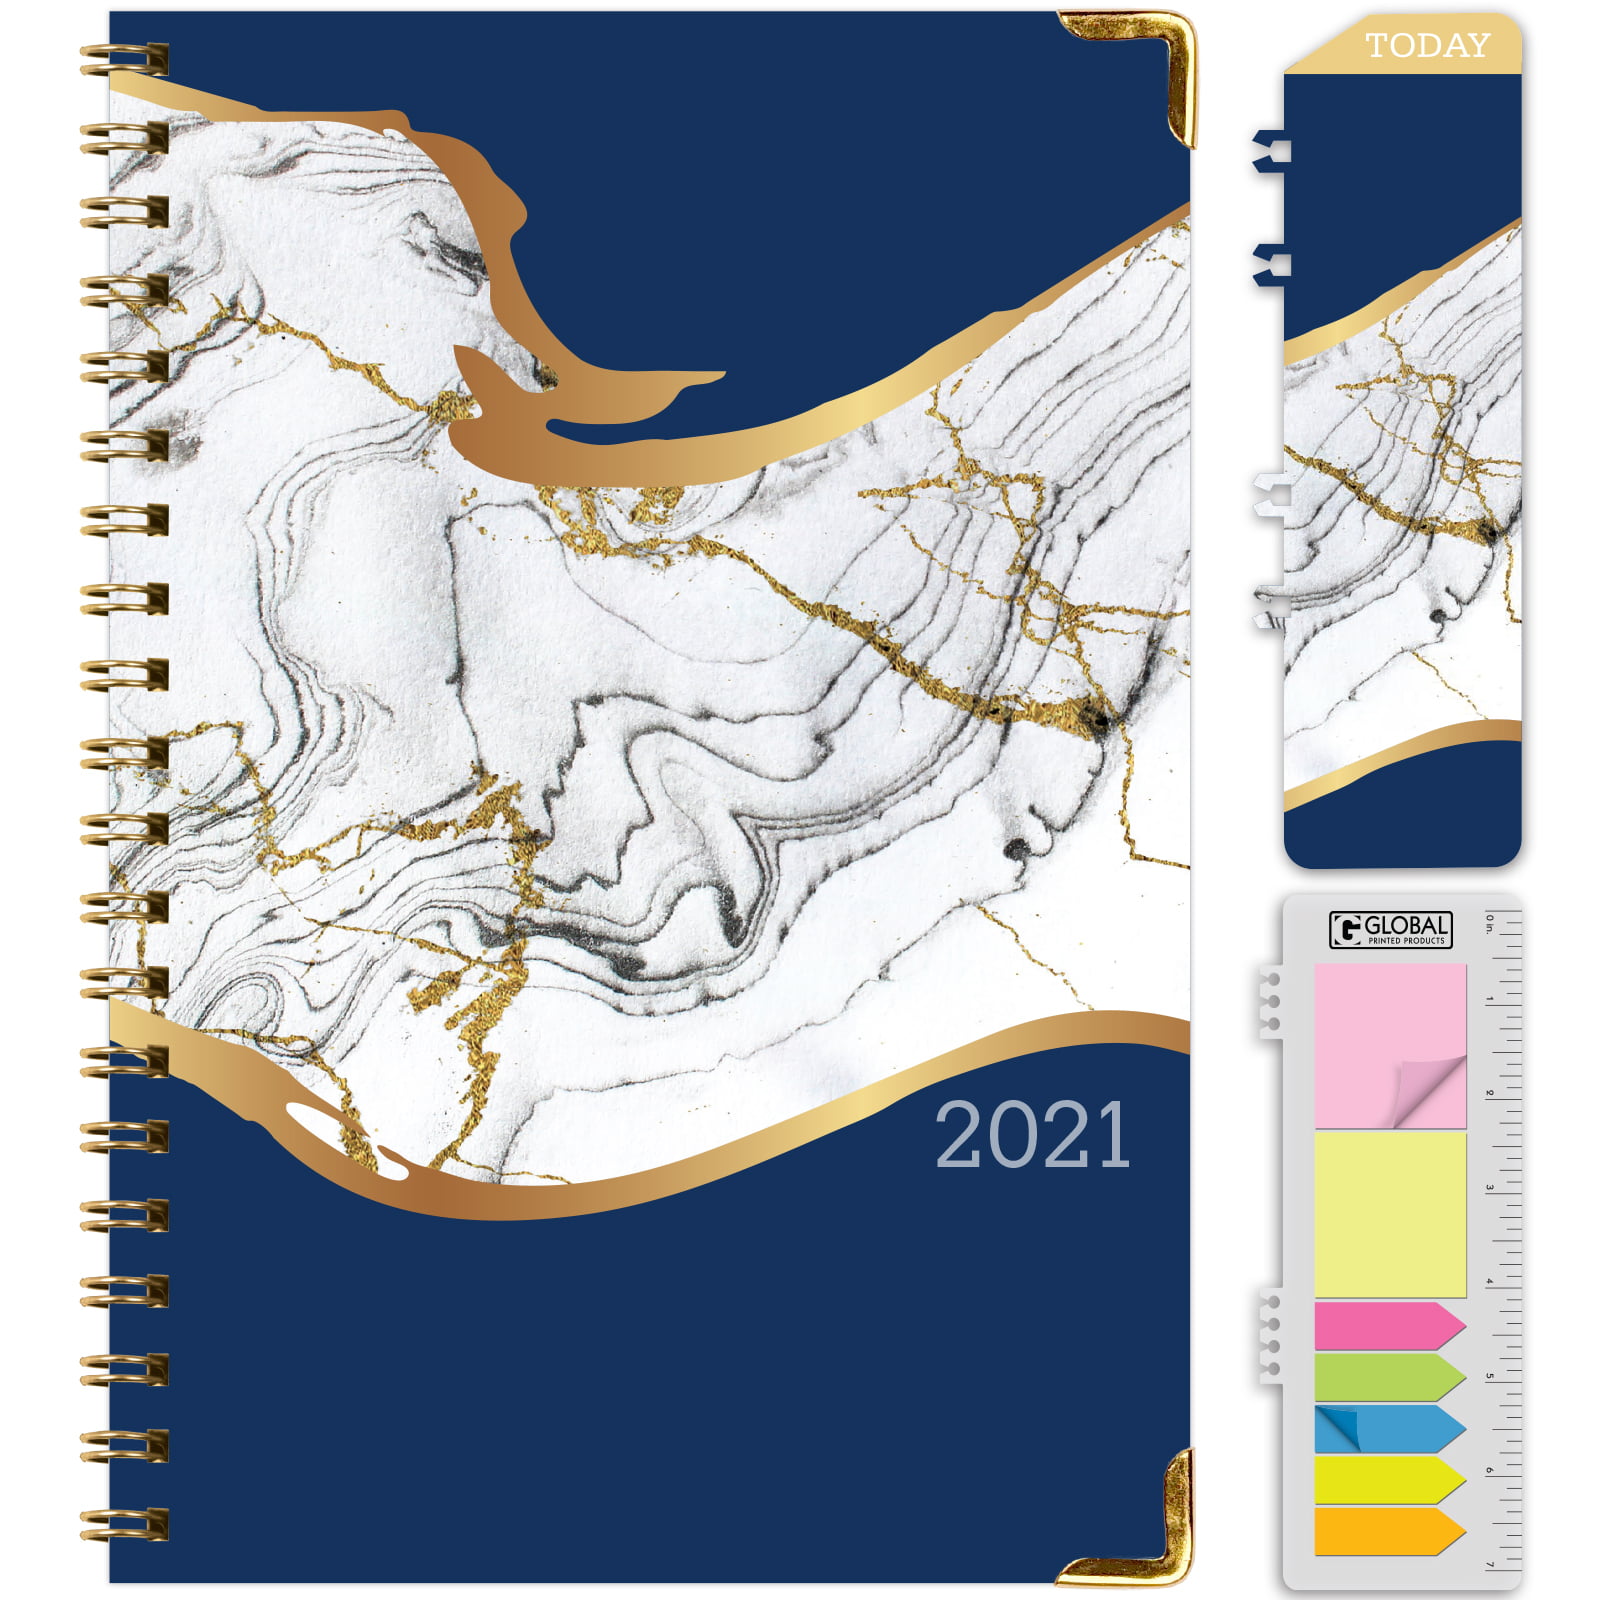 Nov 2020 - Dec 2021 HARDCOVER  2021 Planner Daily Weekly Monthly Planner